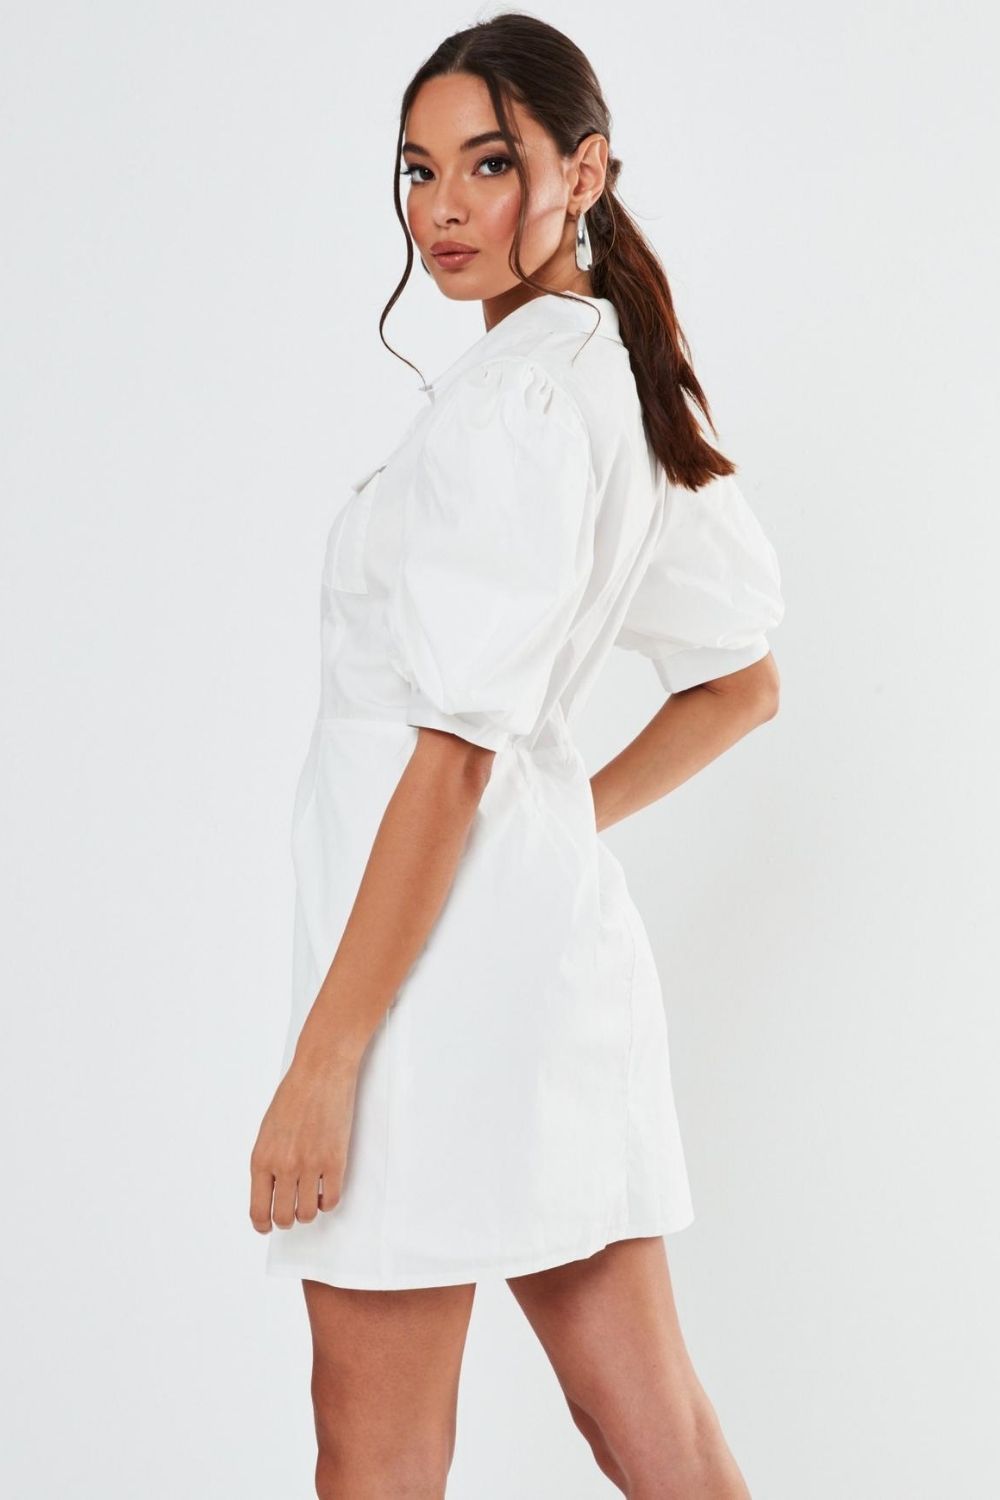 Pocket Details In The Front White Mini Dress